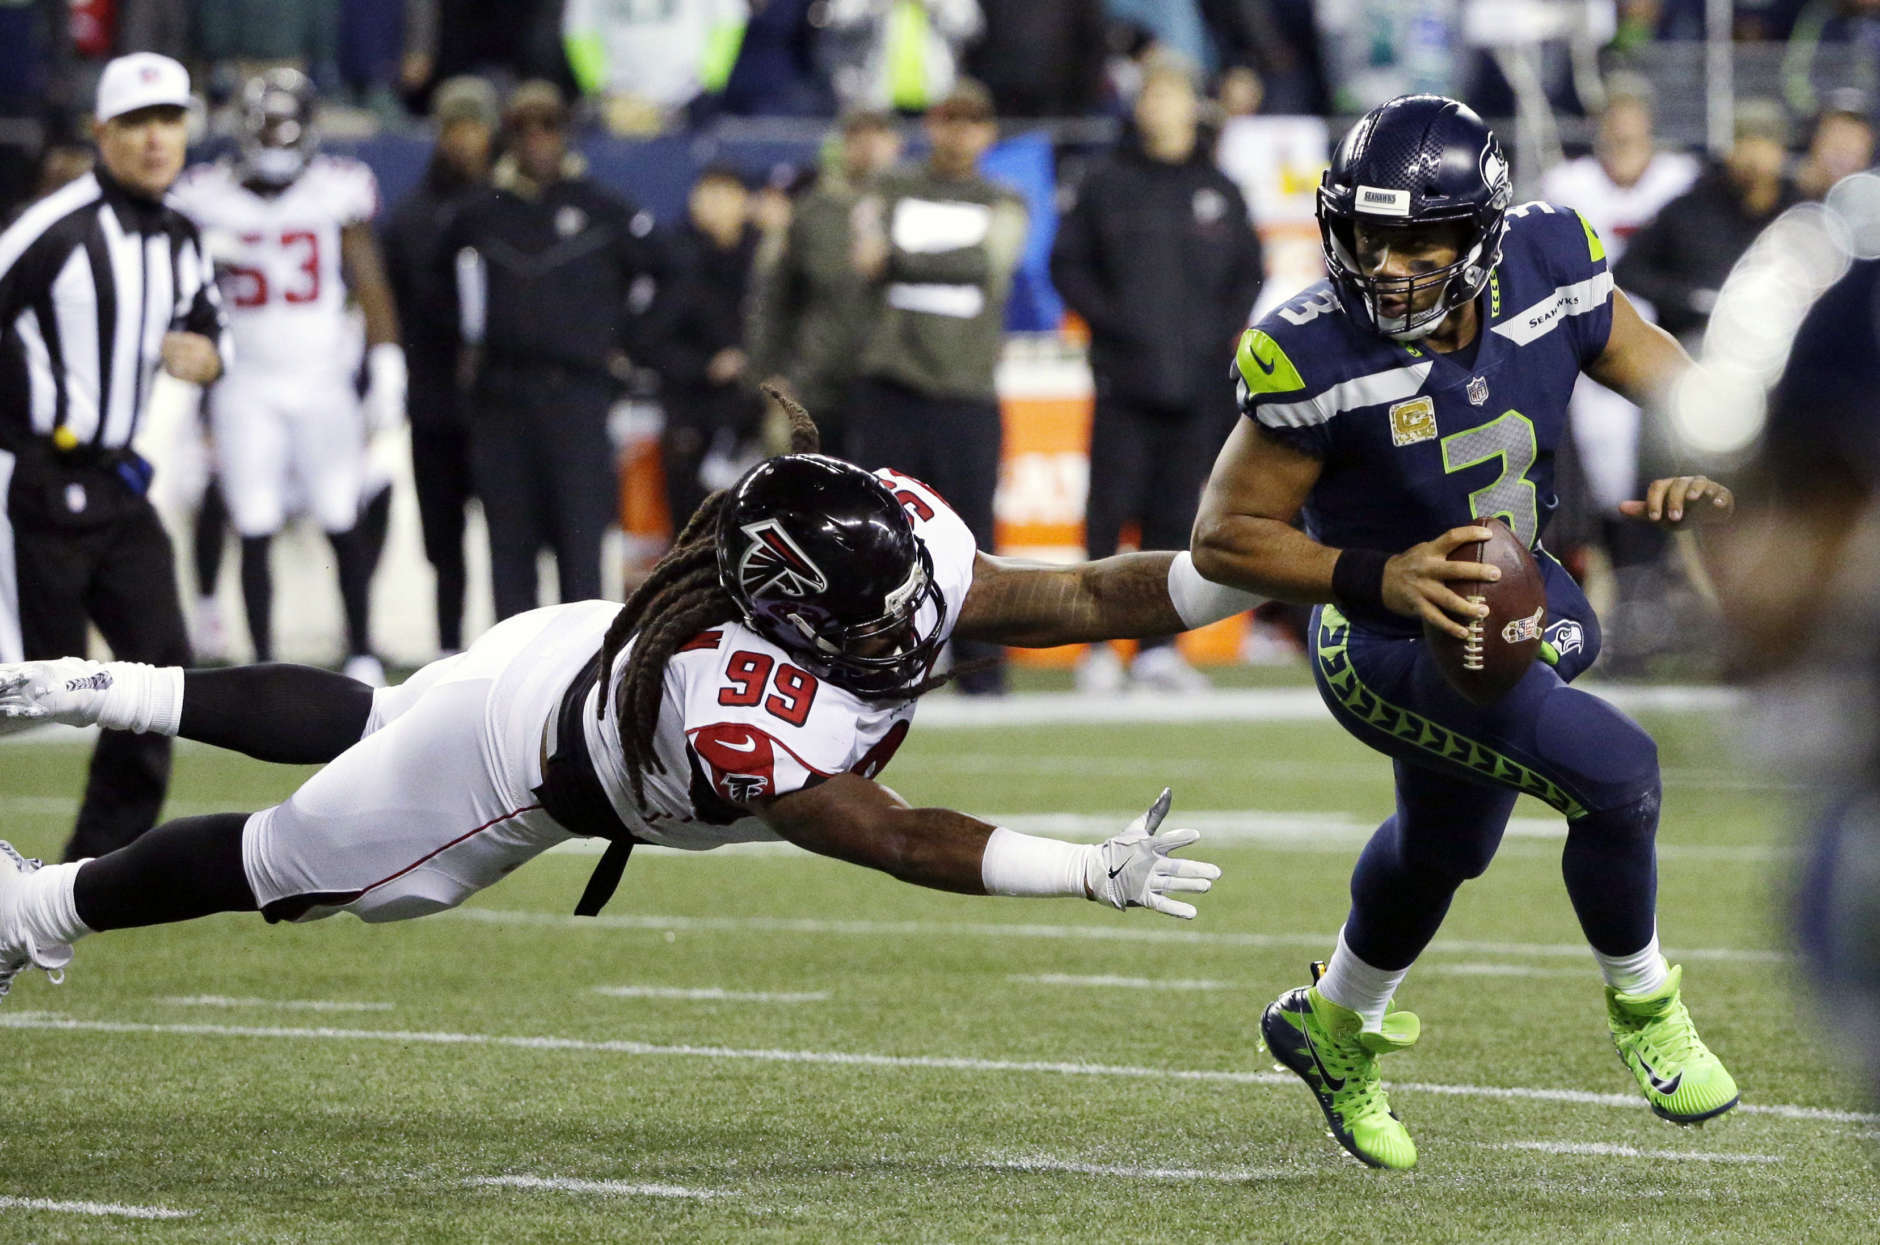 Seattle Seahawks quarterback Russell Wilson (3) scrambles away from a diving Atlanta Falcons defensive end Adrian Clayborn (99) in the first half of an NFL football game, Monday, Nov. 20, 2017, in Seattle. (AP Photo/Ted S. Warren)